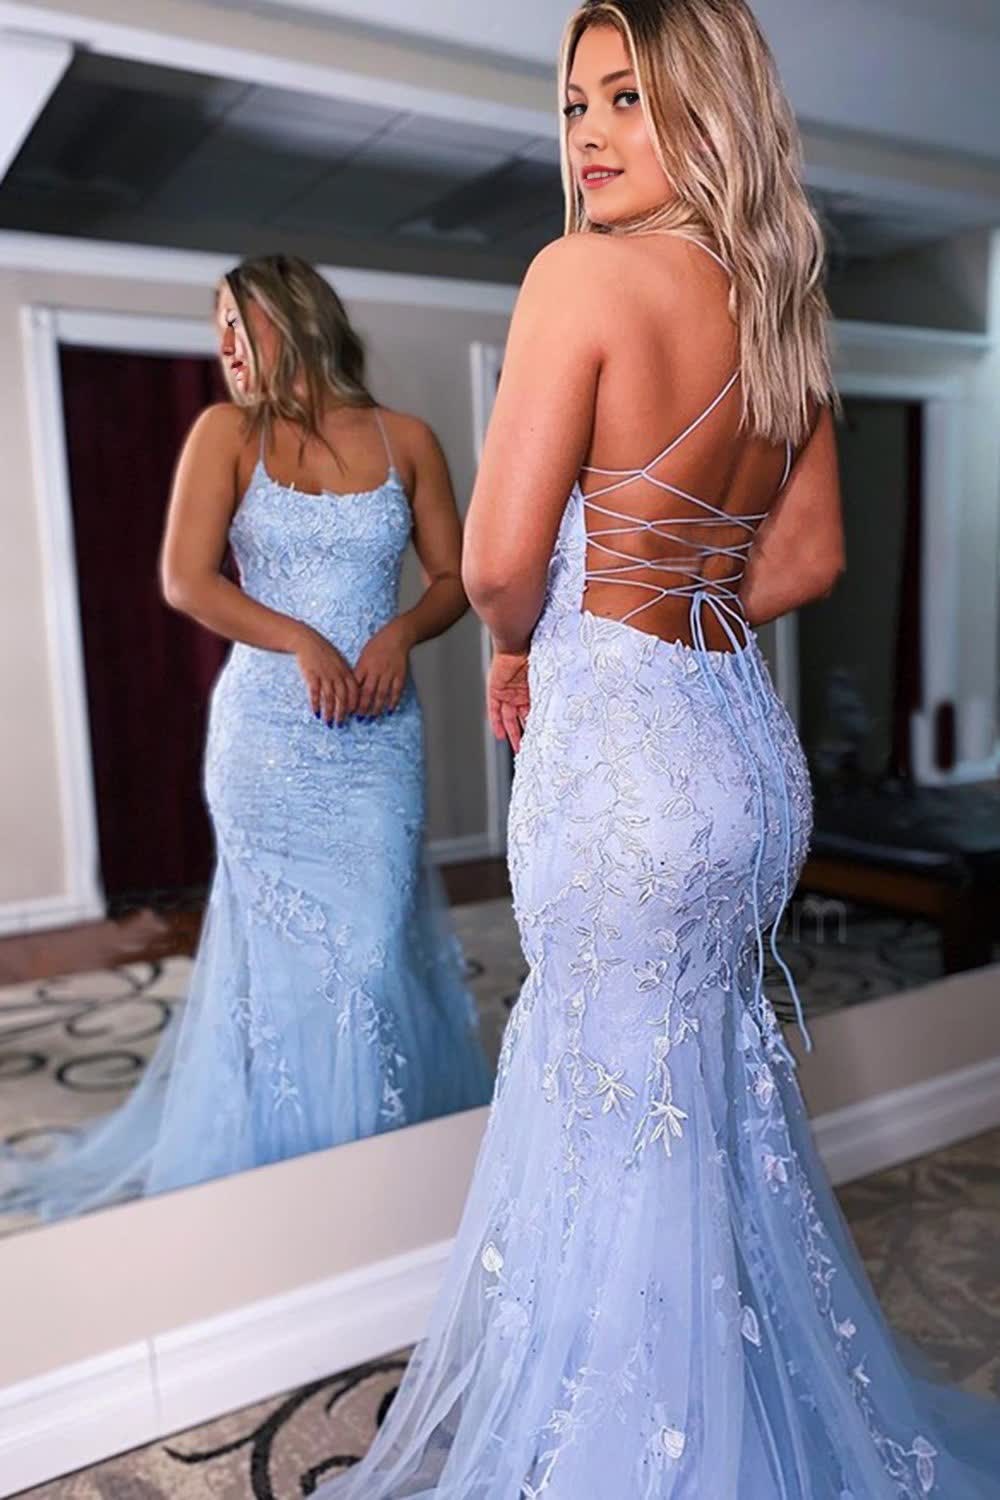 Blue Lace Mermaid Backless Corset Prom Corset Formal Dress outfit, Blue Lace Mermaid Backless Prom Formal Dress